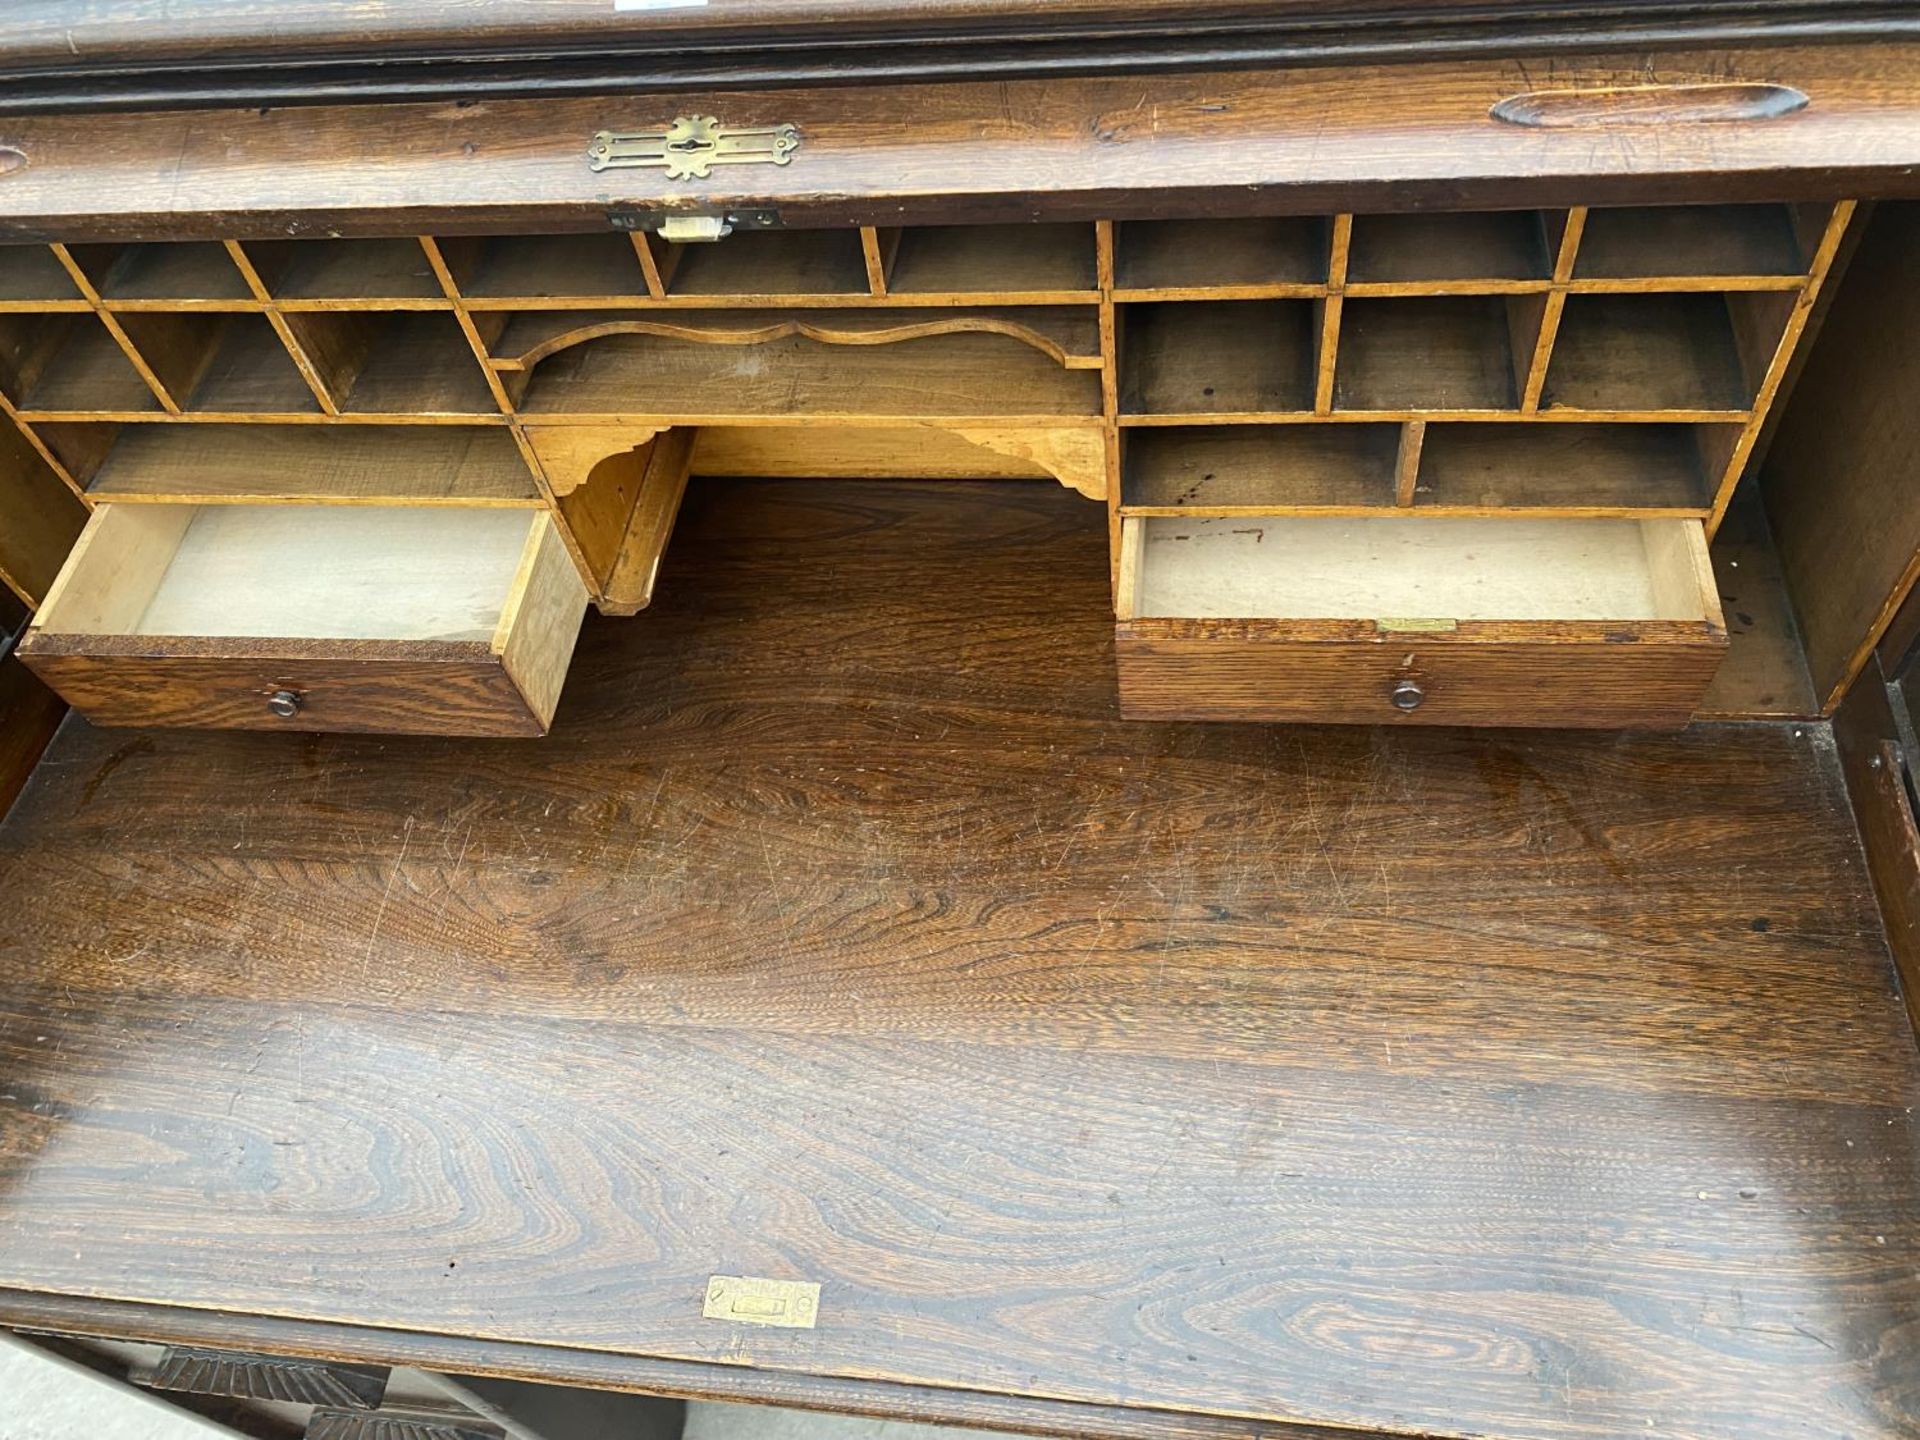 AN EARLY 20TH CENTURY OAK TWIN PEDESTAL ROLL TOP DESK WITH SIX DRAWERS, COMPLETE WITH KEY - Image 7 of 7